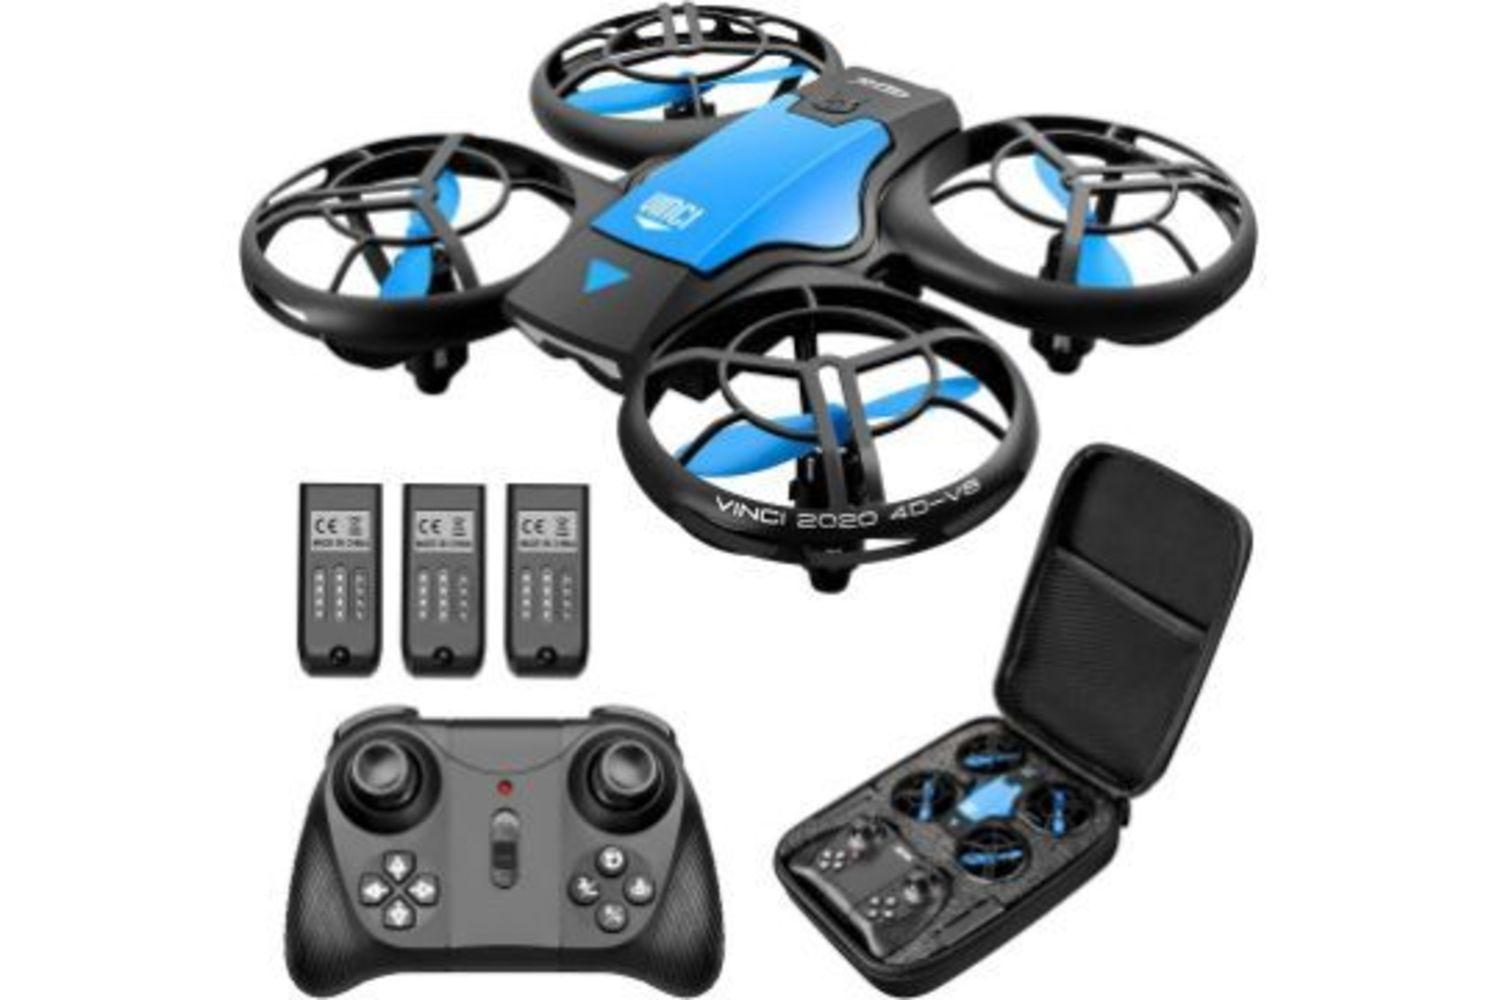 Trade & Single Lots of Remote Control Drones & Helicopters - Collection & Delivery Available - Ideal for Christmas!